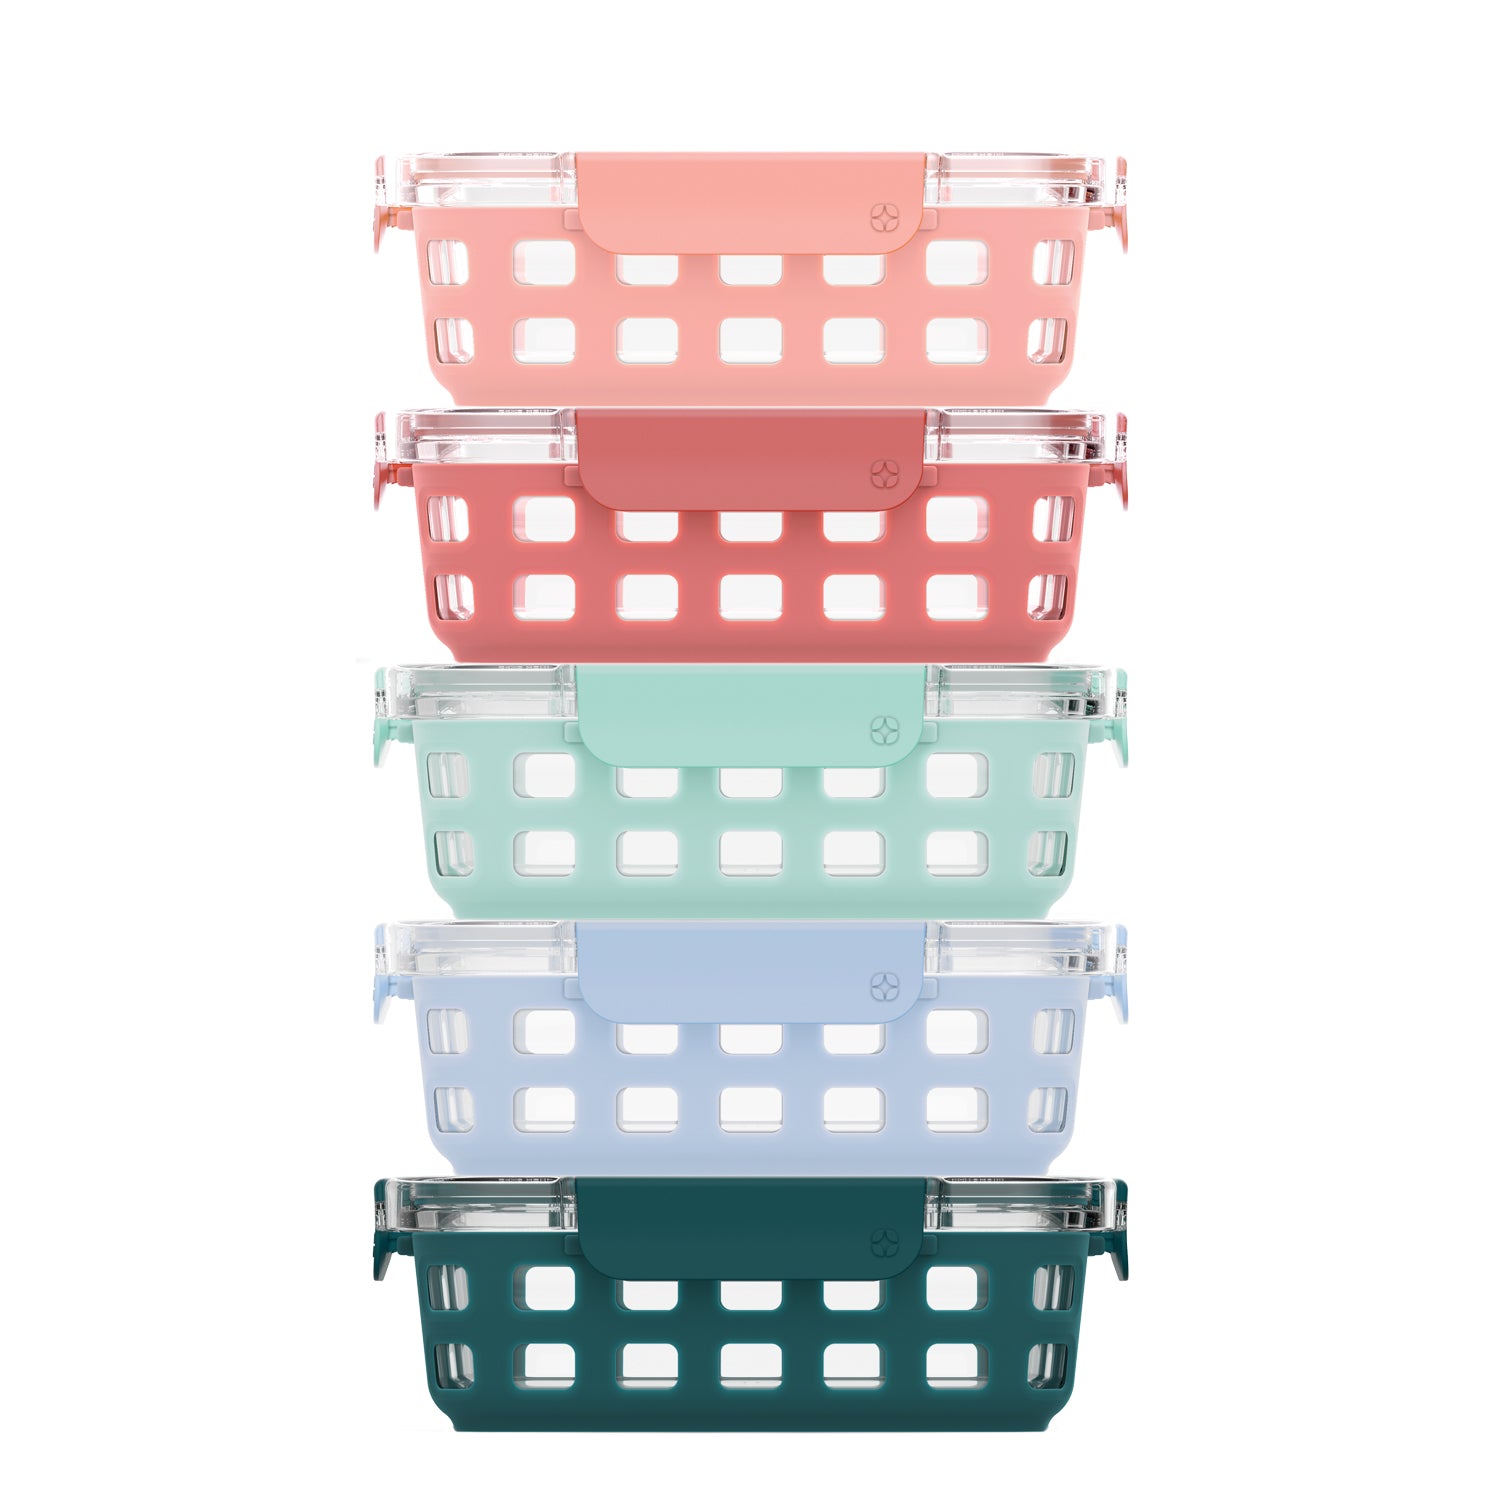 Ello 10pc Meal Prep Food Storage Container Set, Multi-Colored Reviews 2023